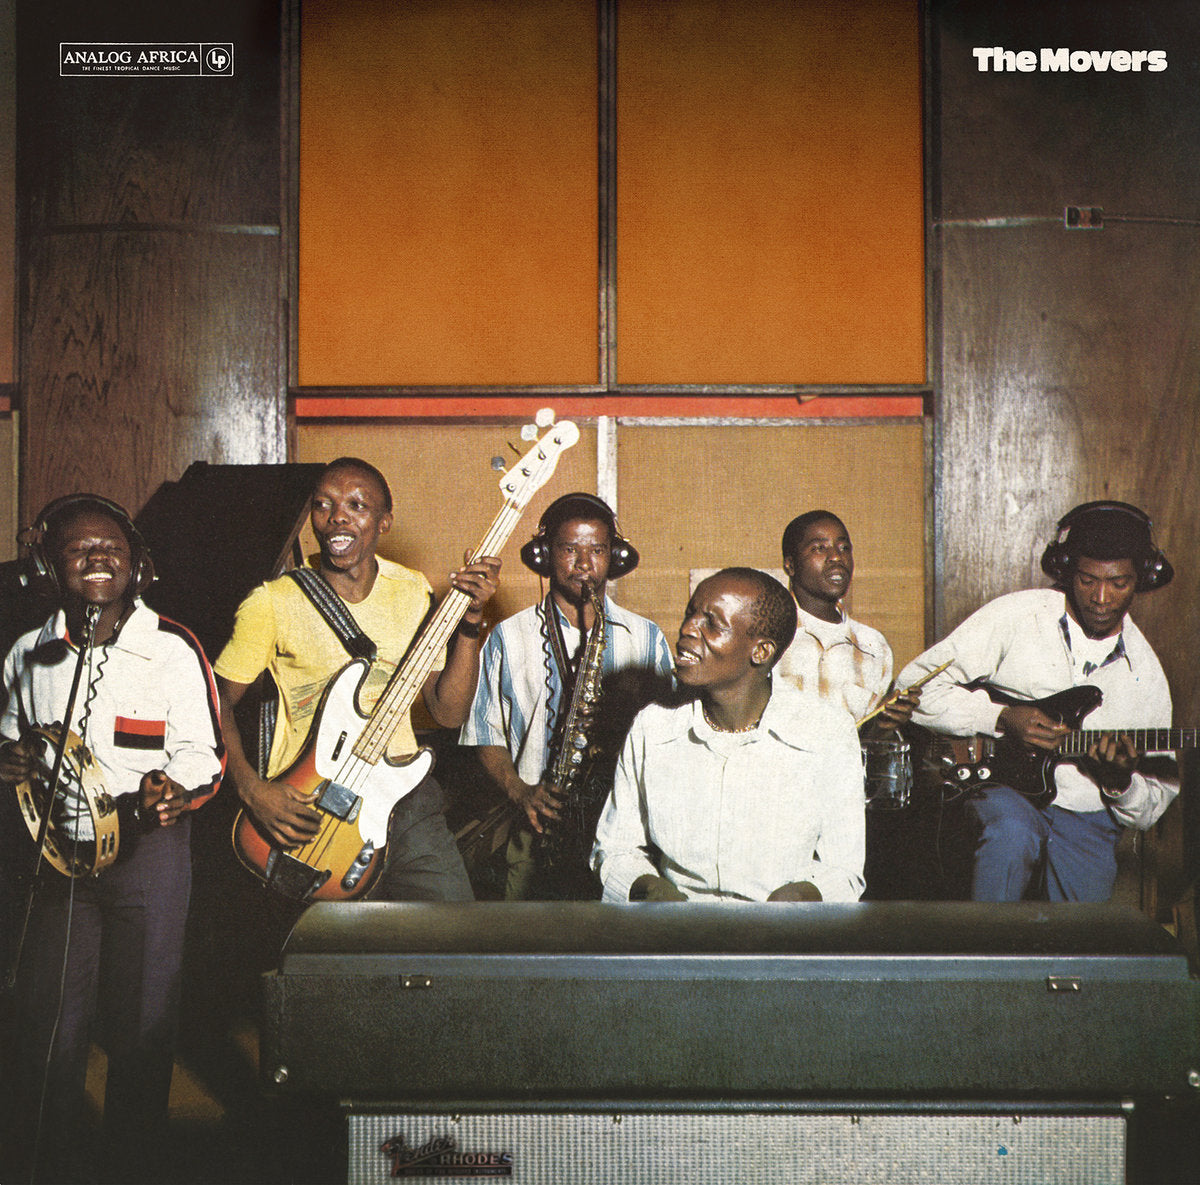 Movers, The - The Movers Vol.1 (1970-1976)